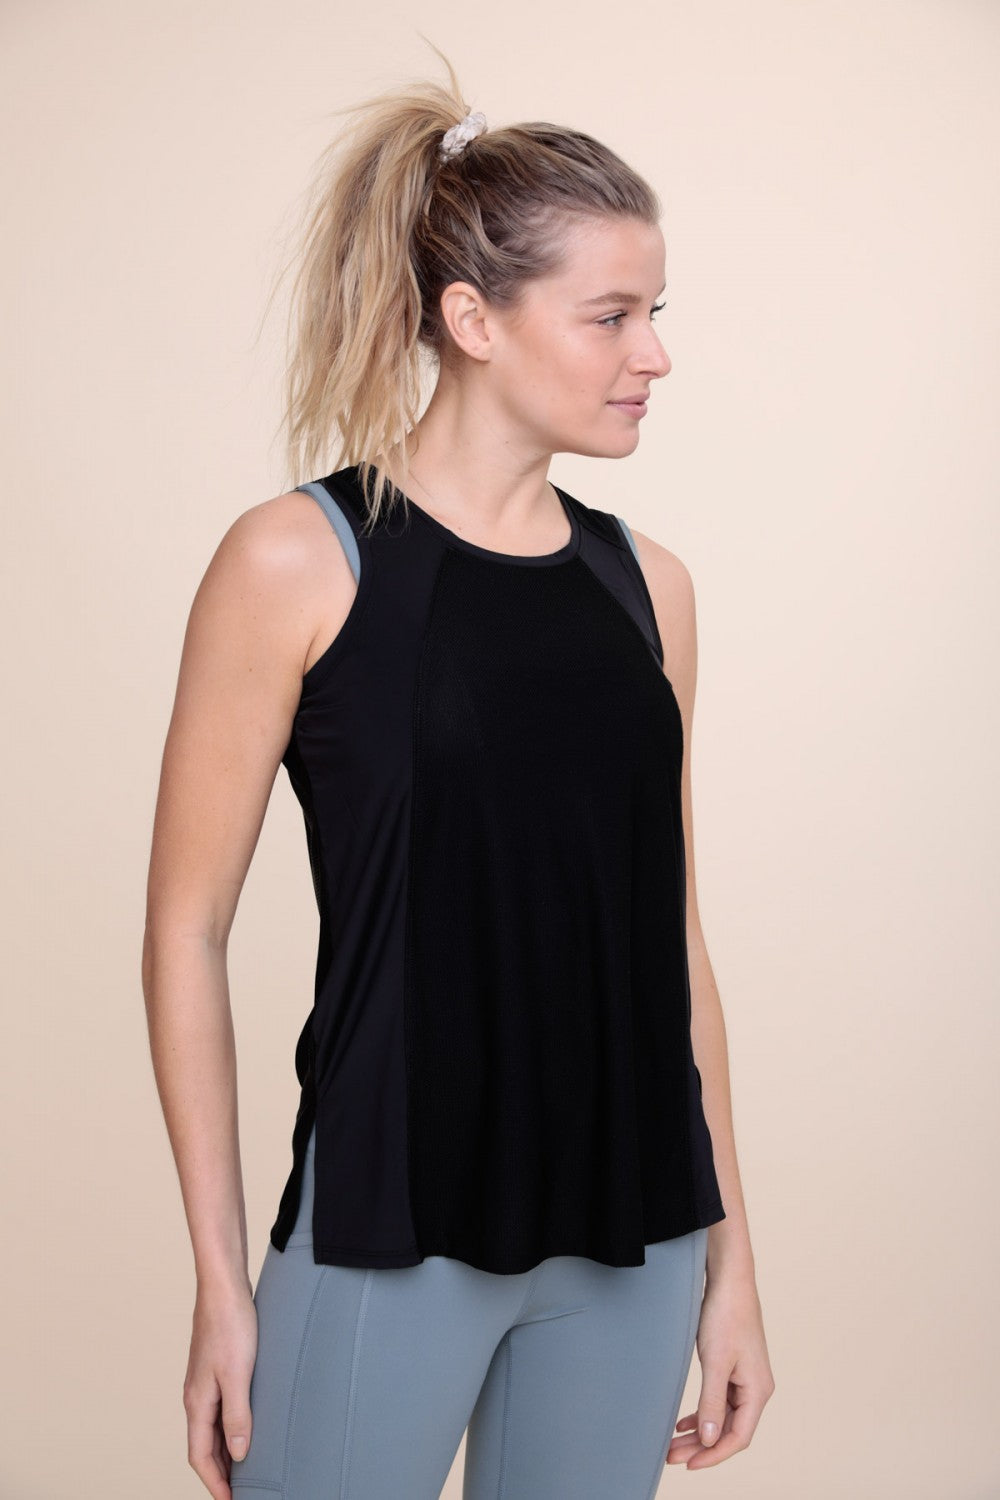 Contrast Mesh Tank Top with Slits.